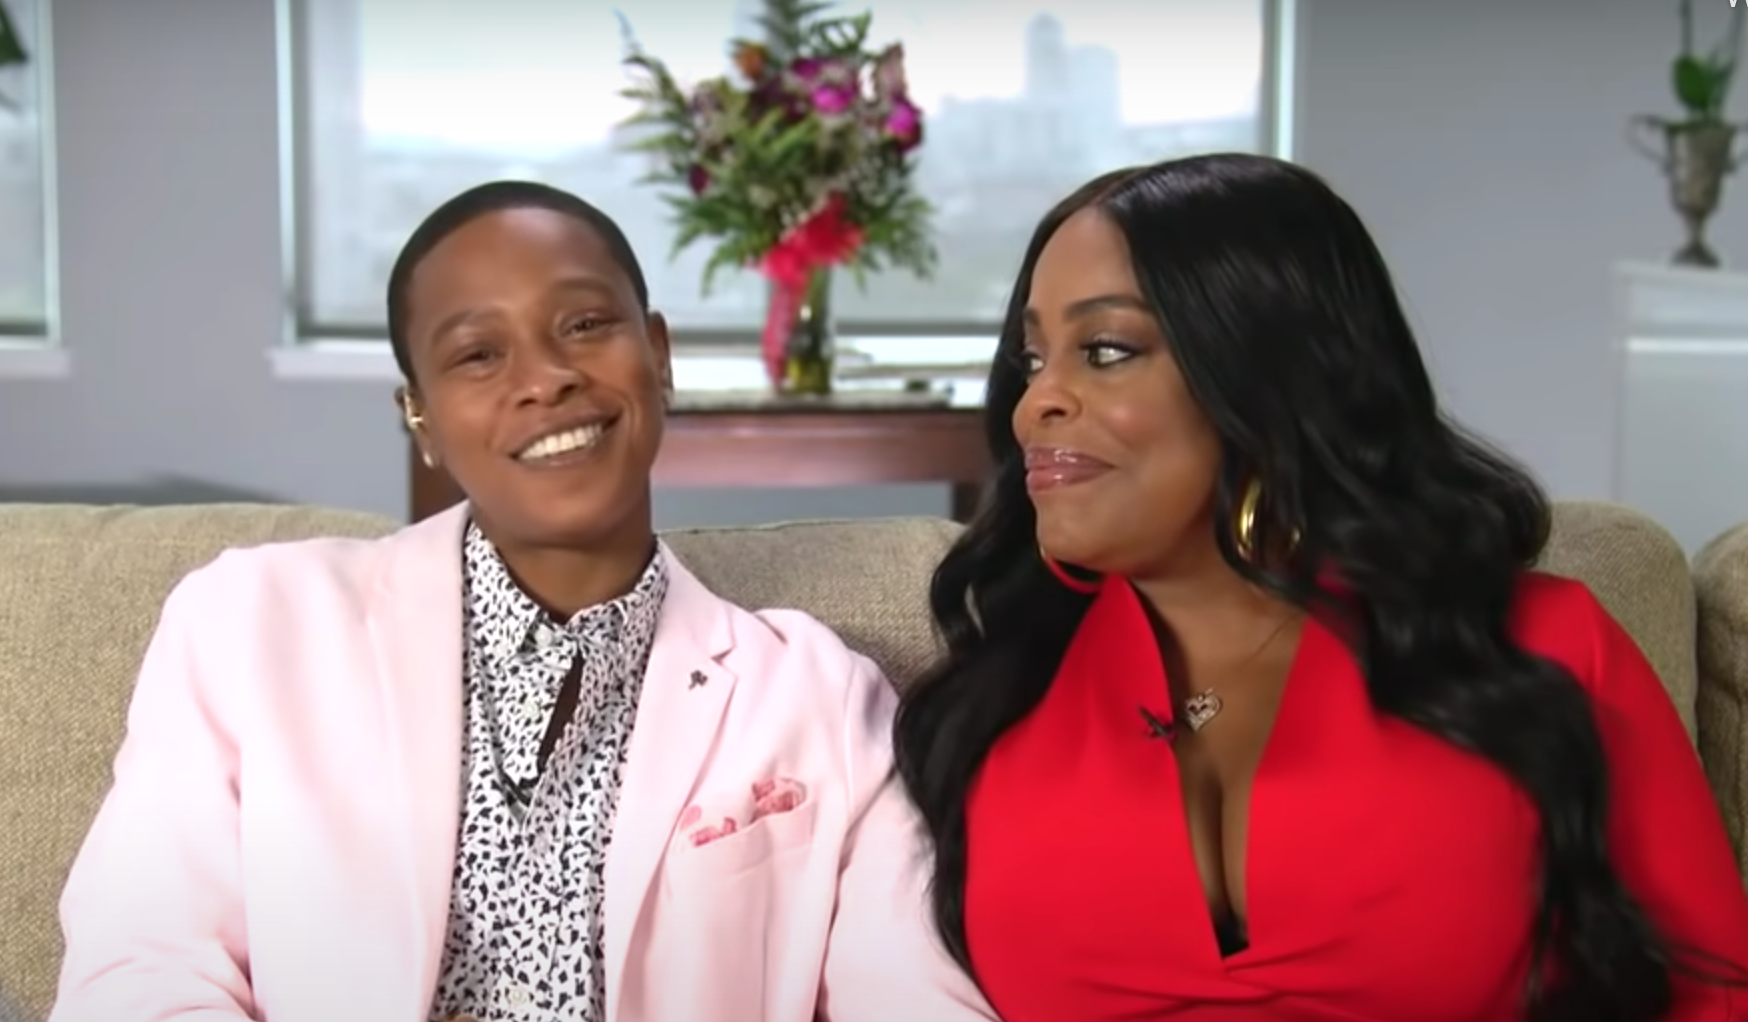 Niecy Nash says she's 'never been with a woman before' meeting wife on ...